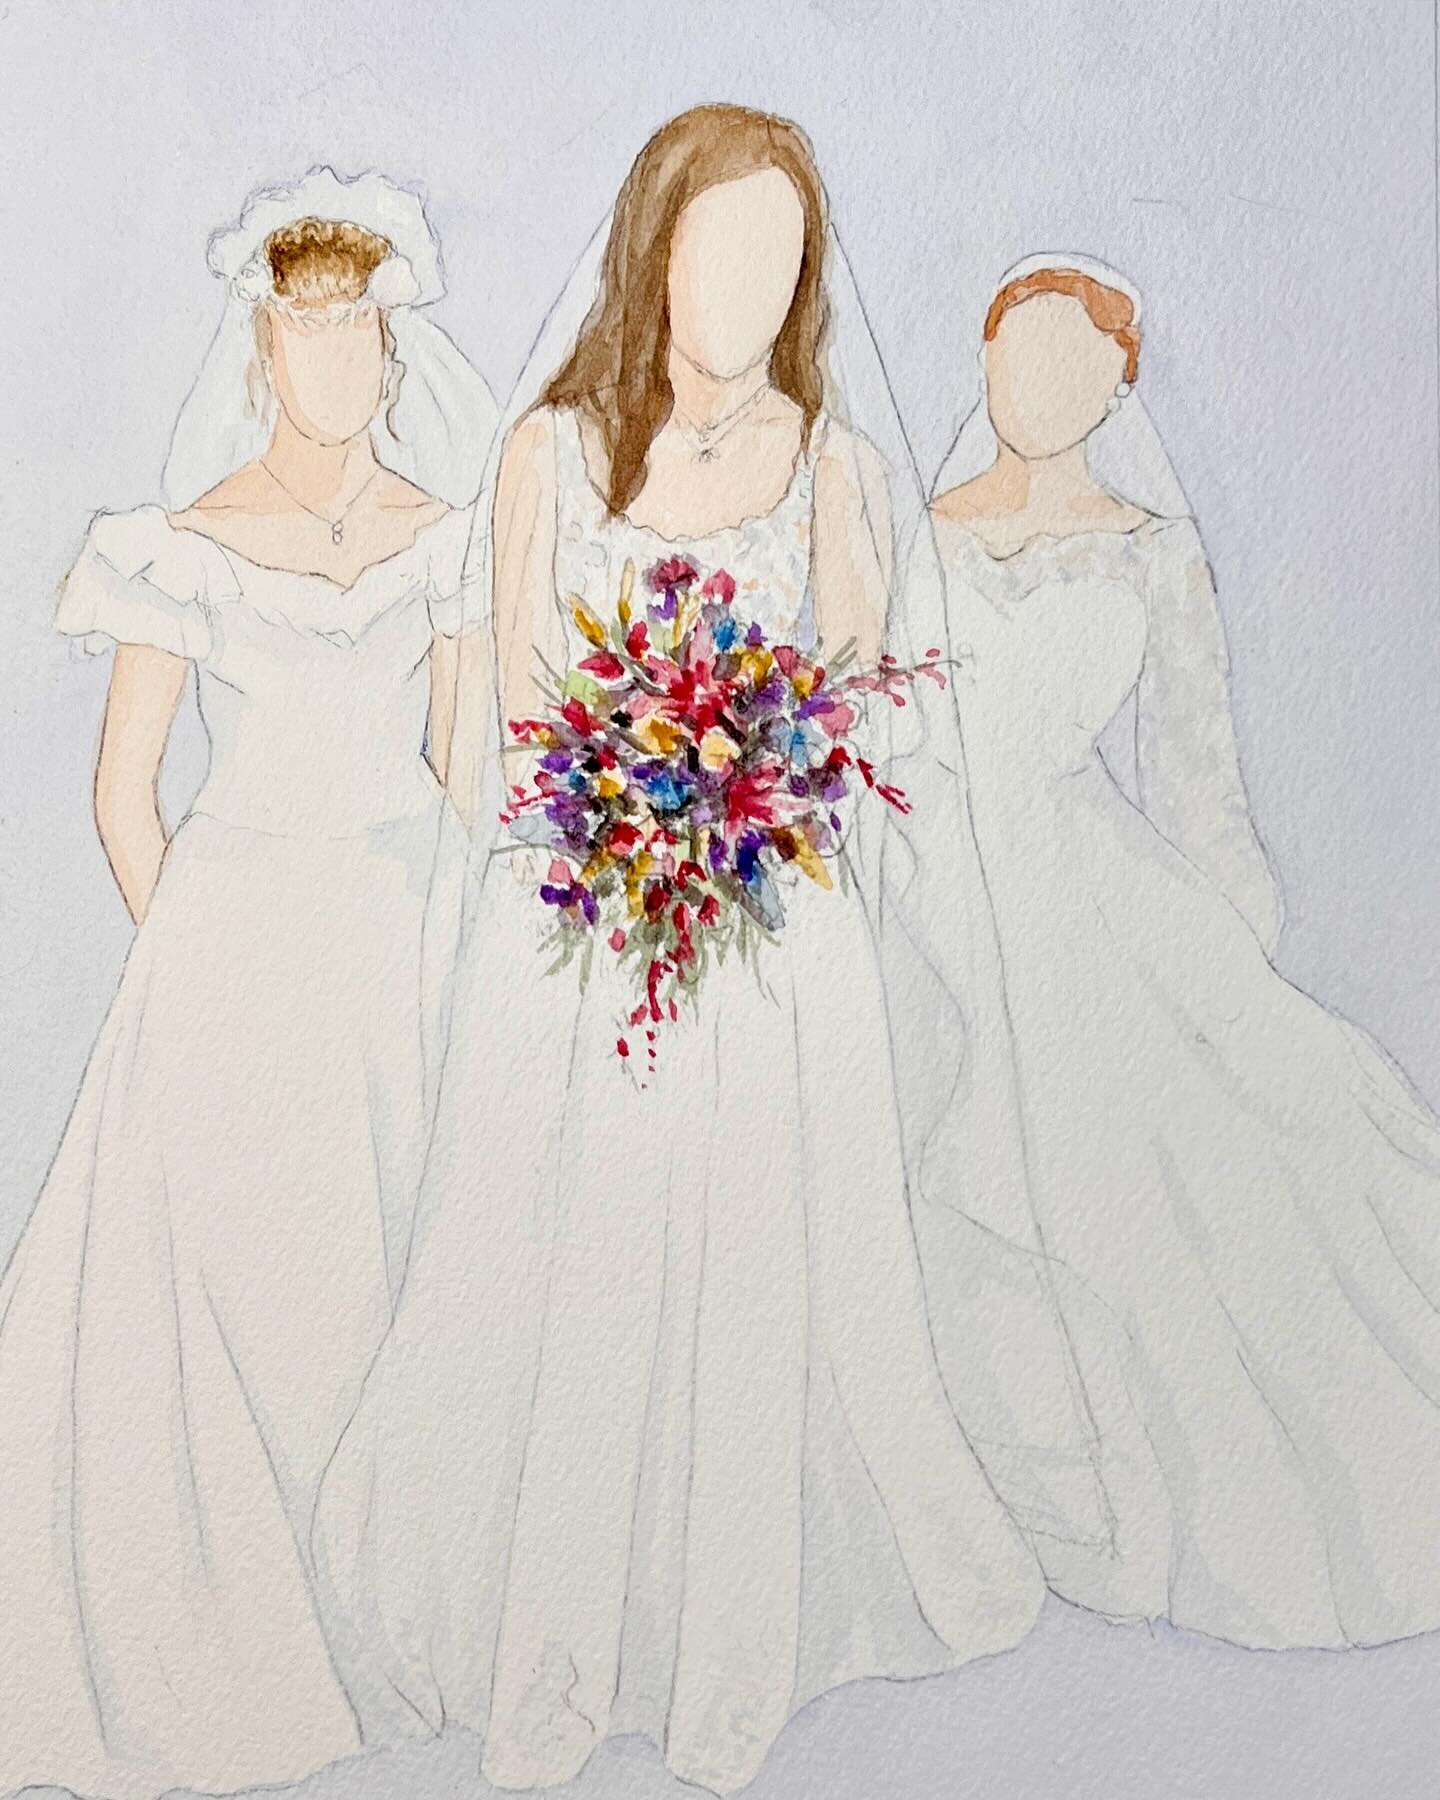 A very fun generational wedding photo for one of my long time clients. It&rsquo;s her, her mother, and her grandmother all on their wedding days 💚

I love being able to create timeless memories for my clients! 

#art #artist #paint #painter #paintin